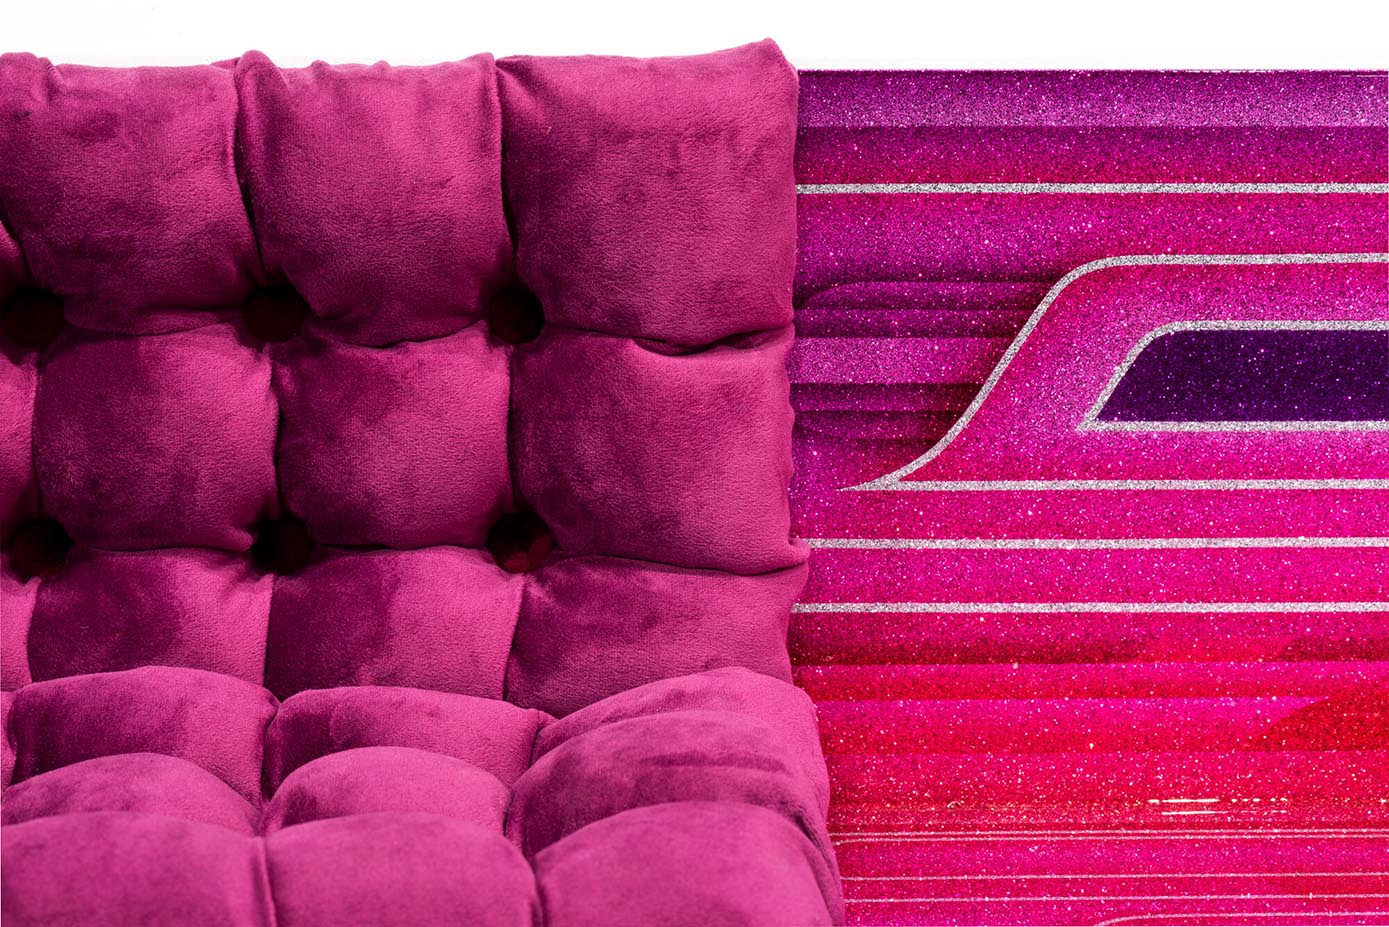 Dark Pink deep button tufting cushion, next to a multiline textile with different pink accents